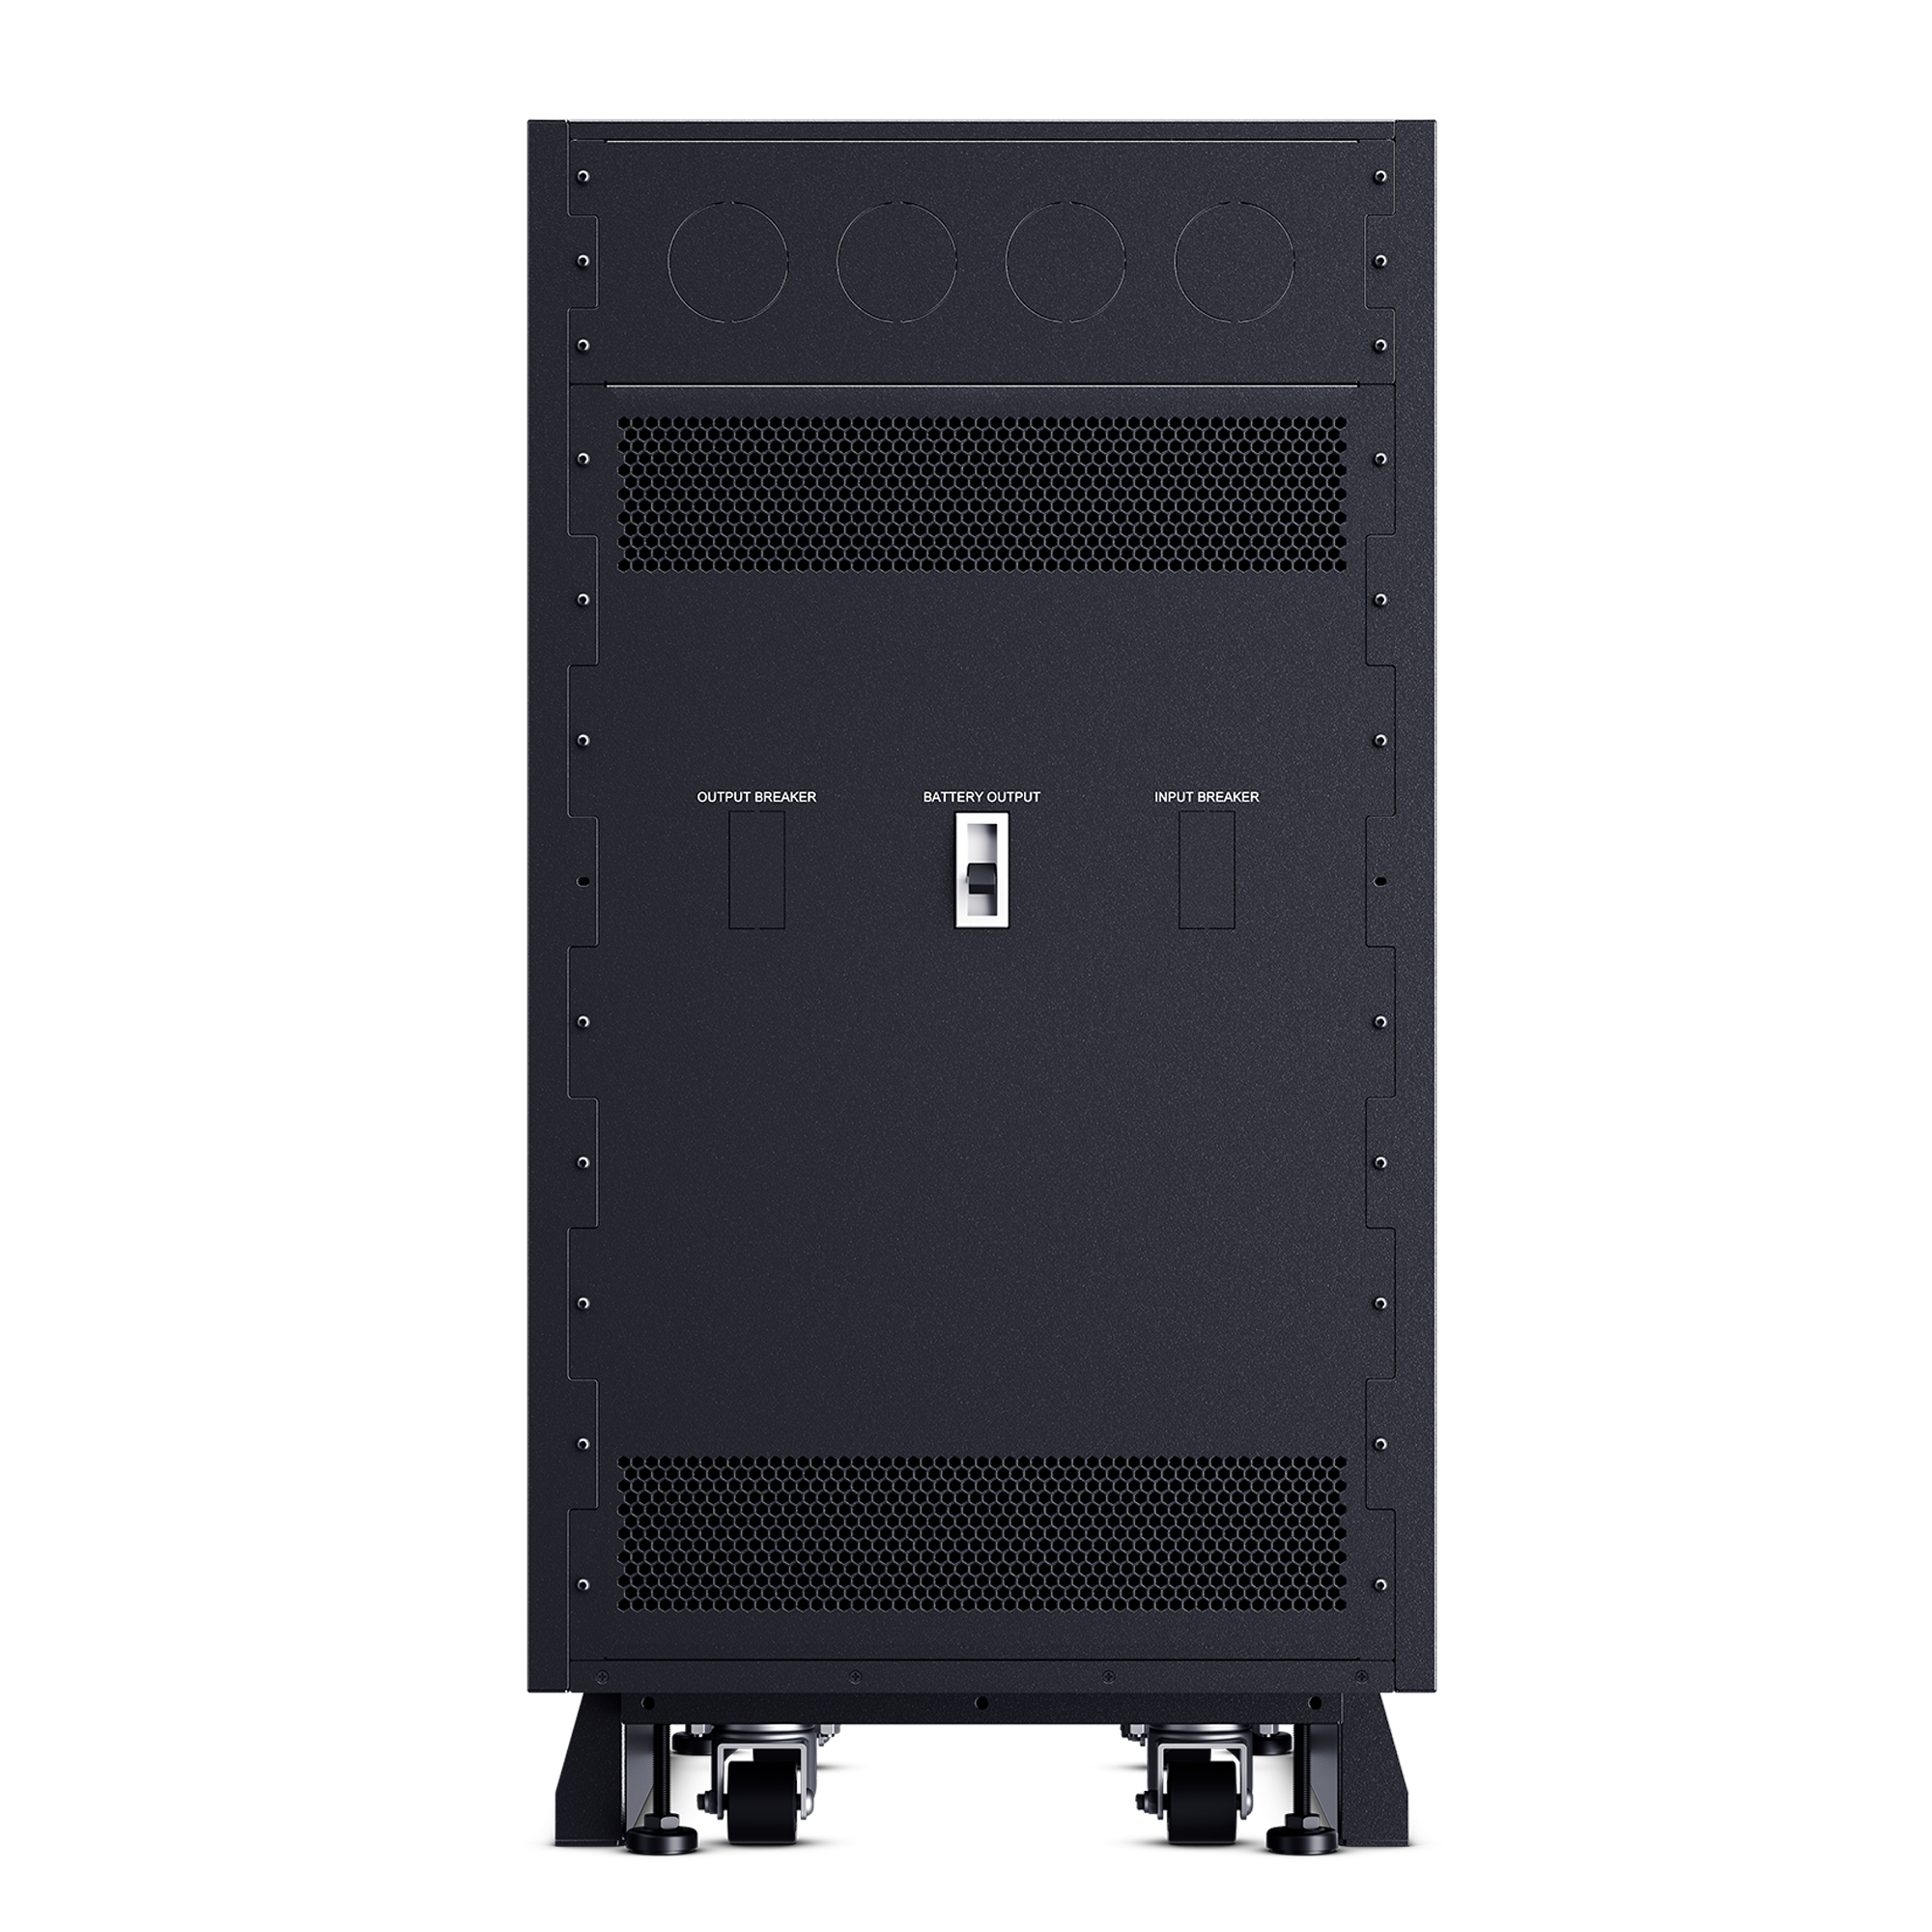 Dicteren schapen Glad BCT6L9N225 - 3-Phase Modular UPS Battery Cabinets - Product Details, Specs,  Downloads | CyberPower